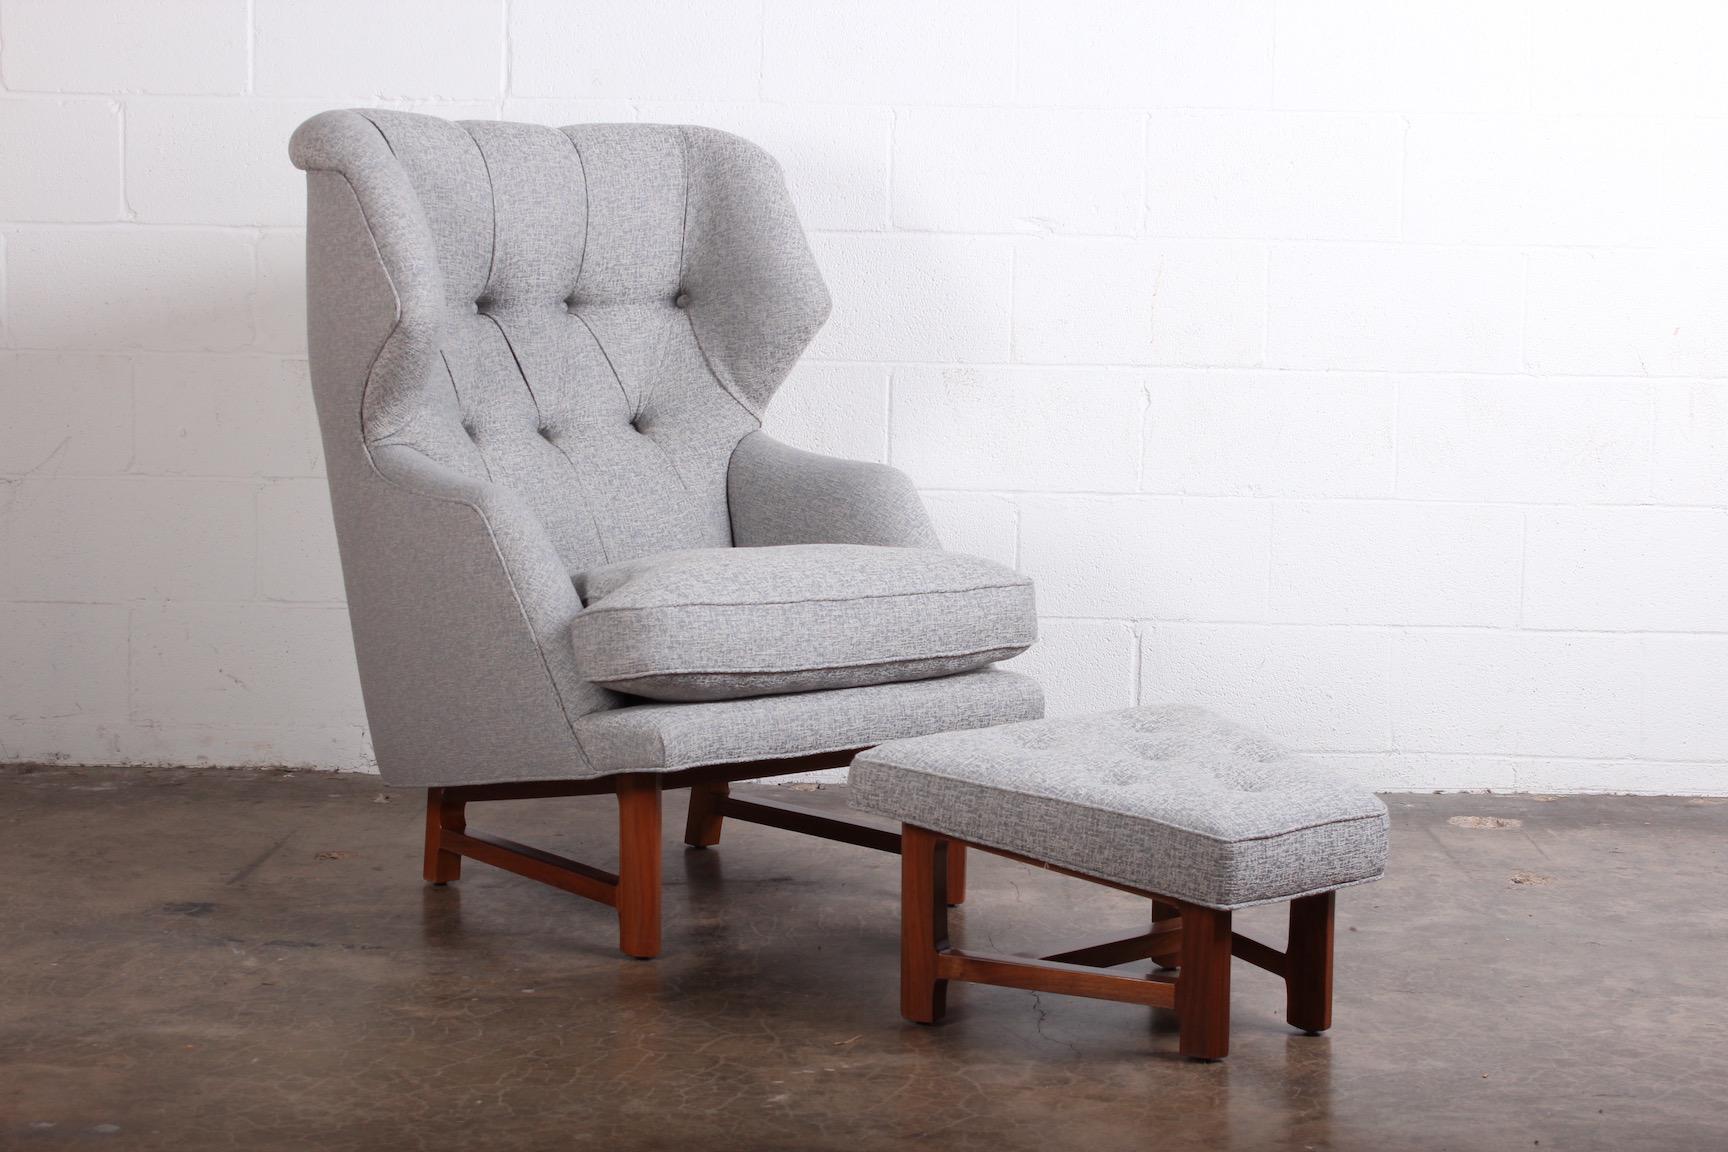 A beautifully restored Janus wing chair and ottoman designed by Edward Wormley for Dunbar.